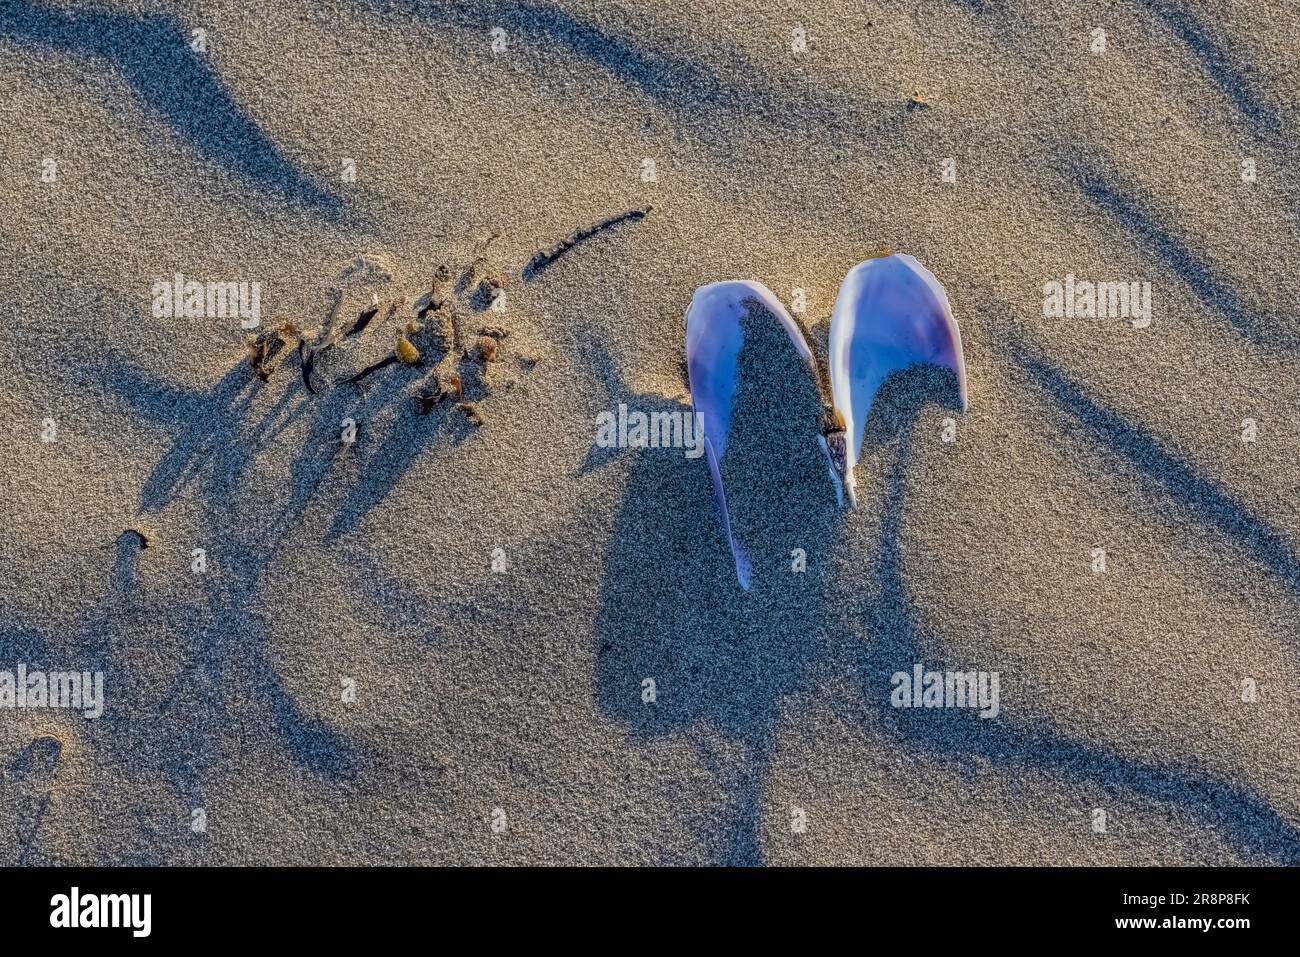 Pacific Razor Clam, Siliqua patula, shell in sand on Hobuck Beach, Makah Nation, Olympic Peninsula, Washington State, USA [Editorial licensing only] Stock Photo